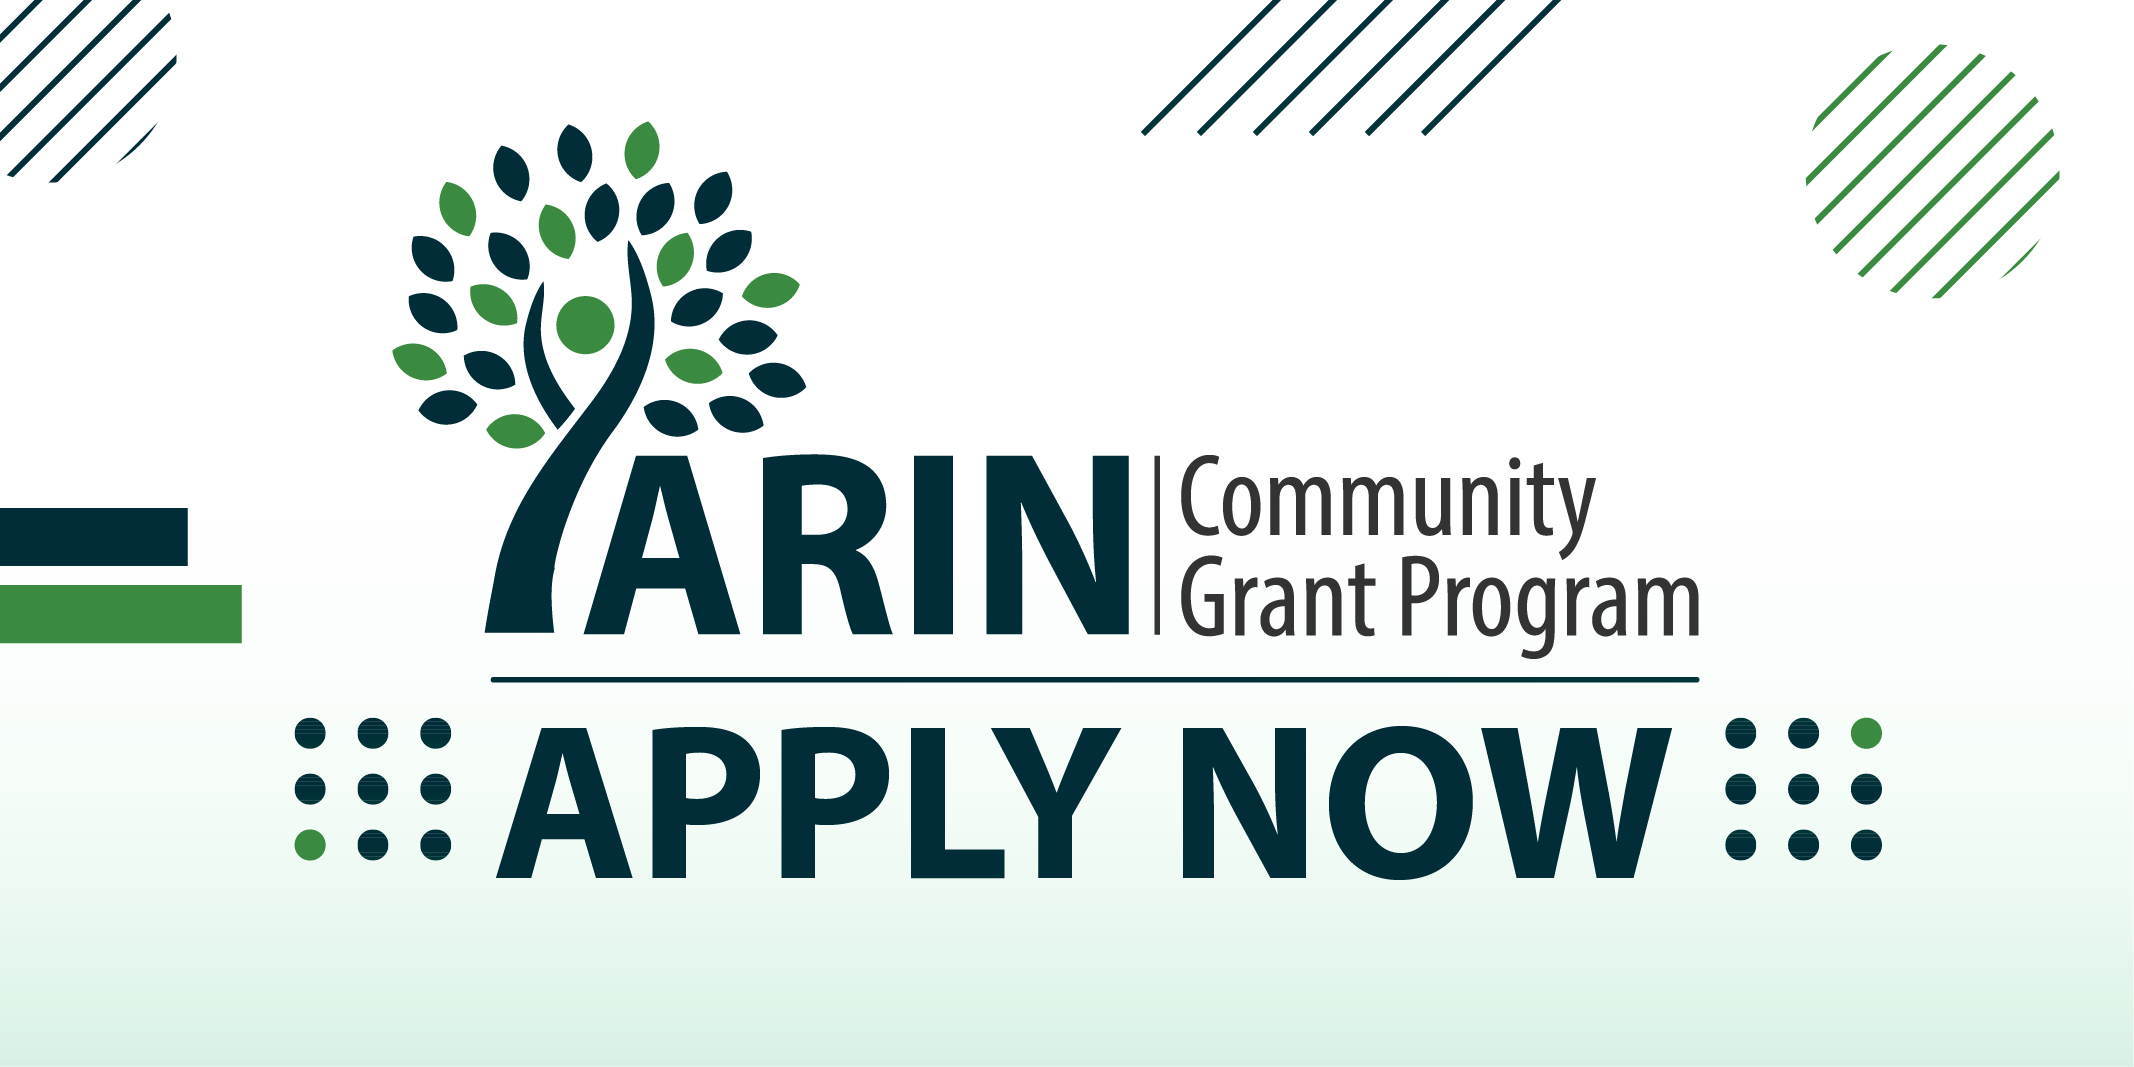 Call for Grant Applications Is Open